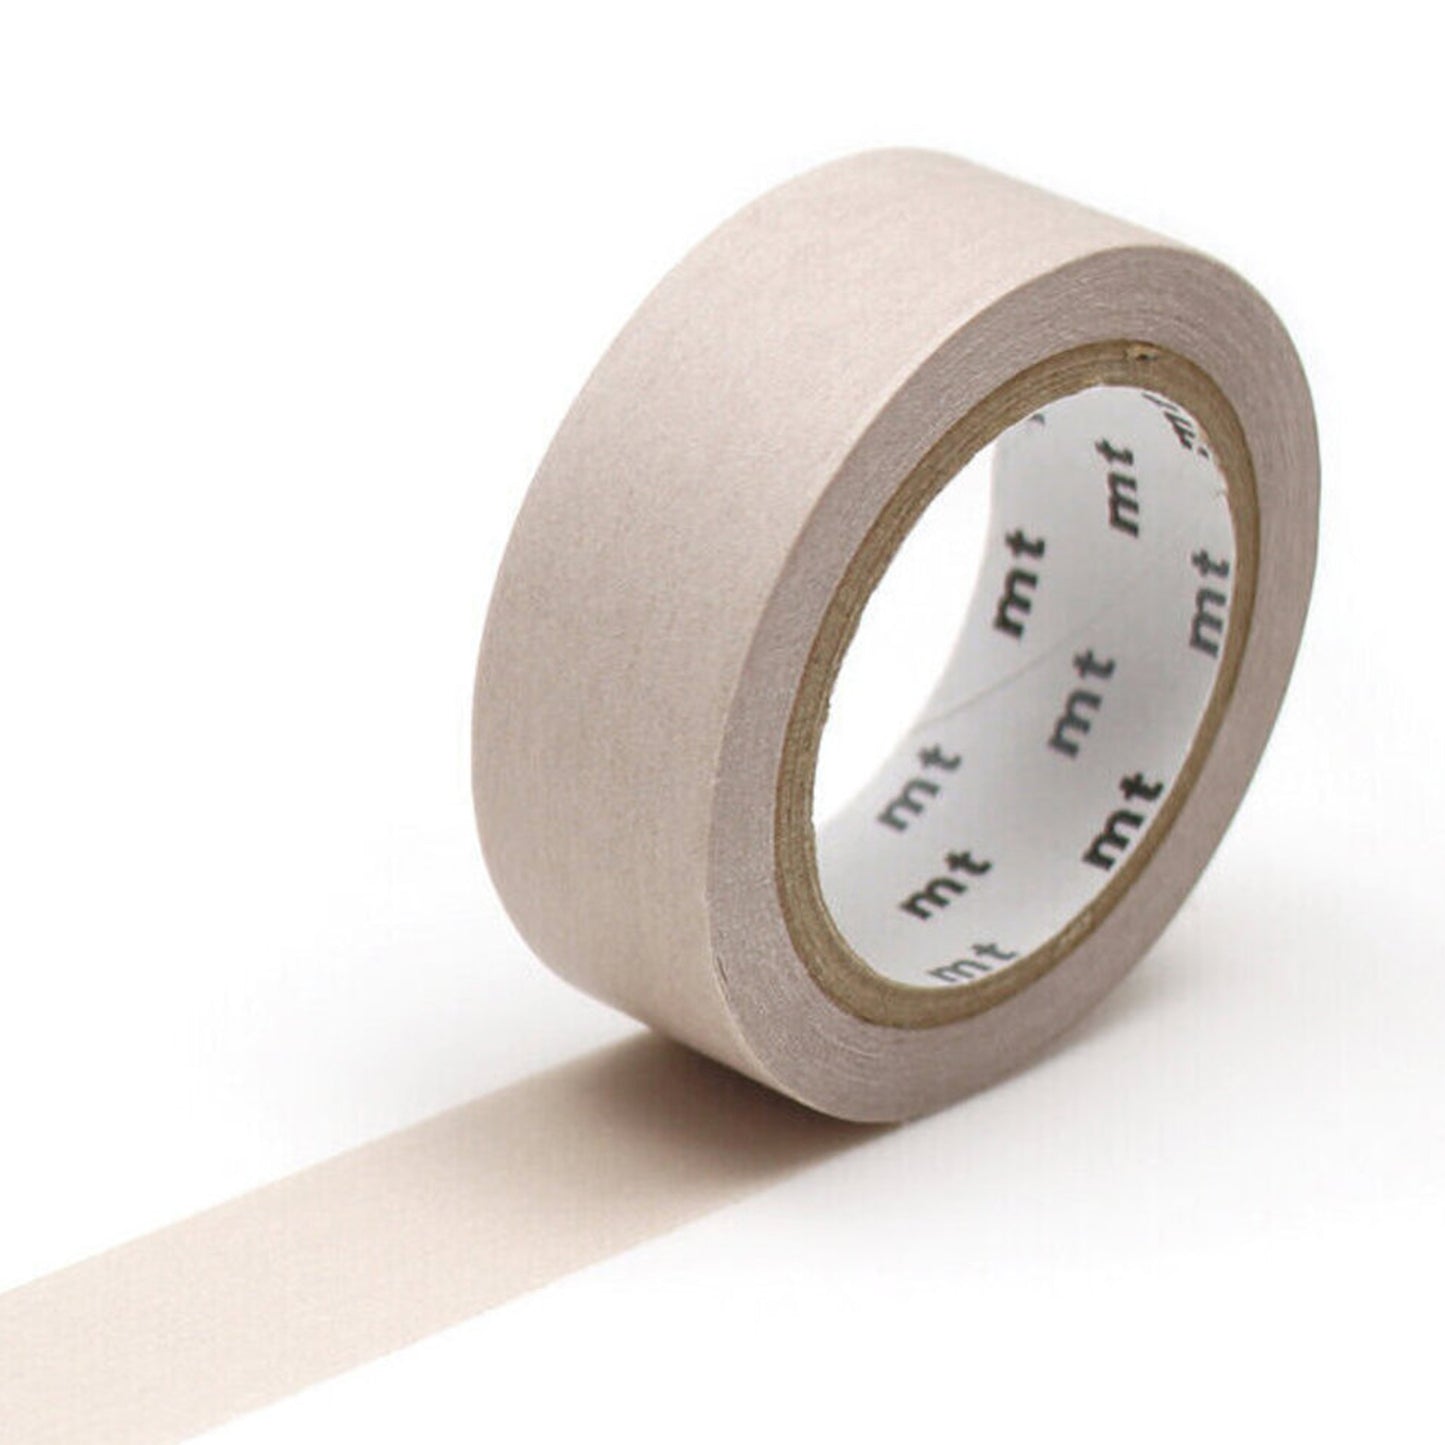 Washi Tape in Solid Pastel Colors by MT